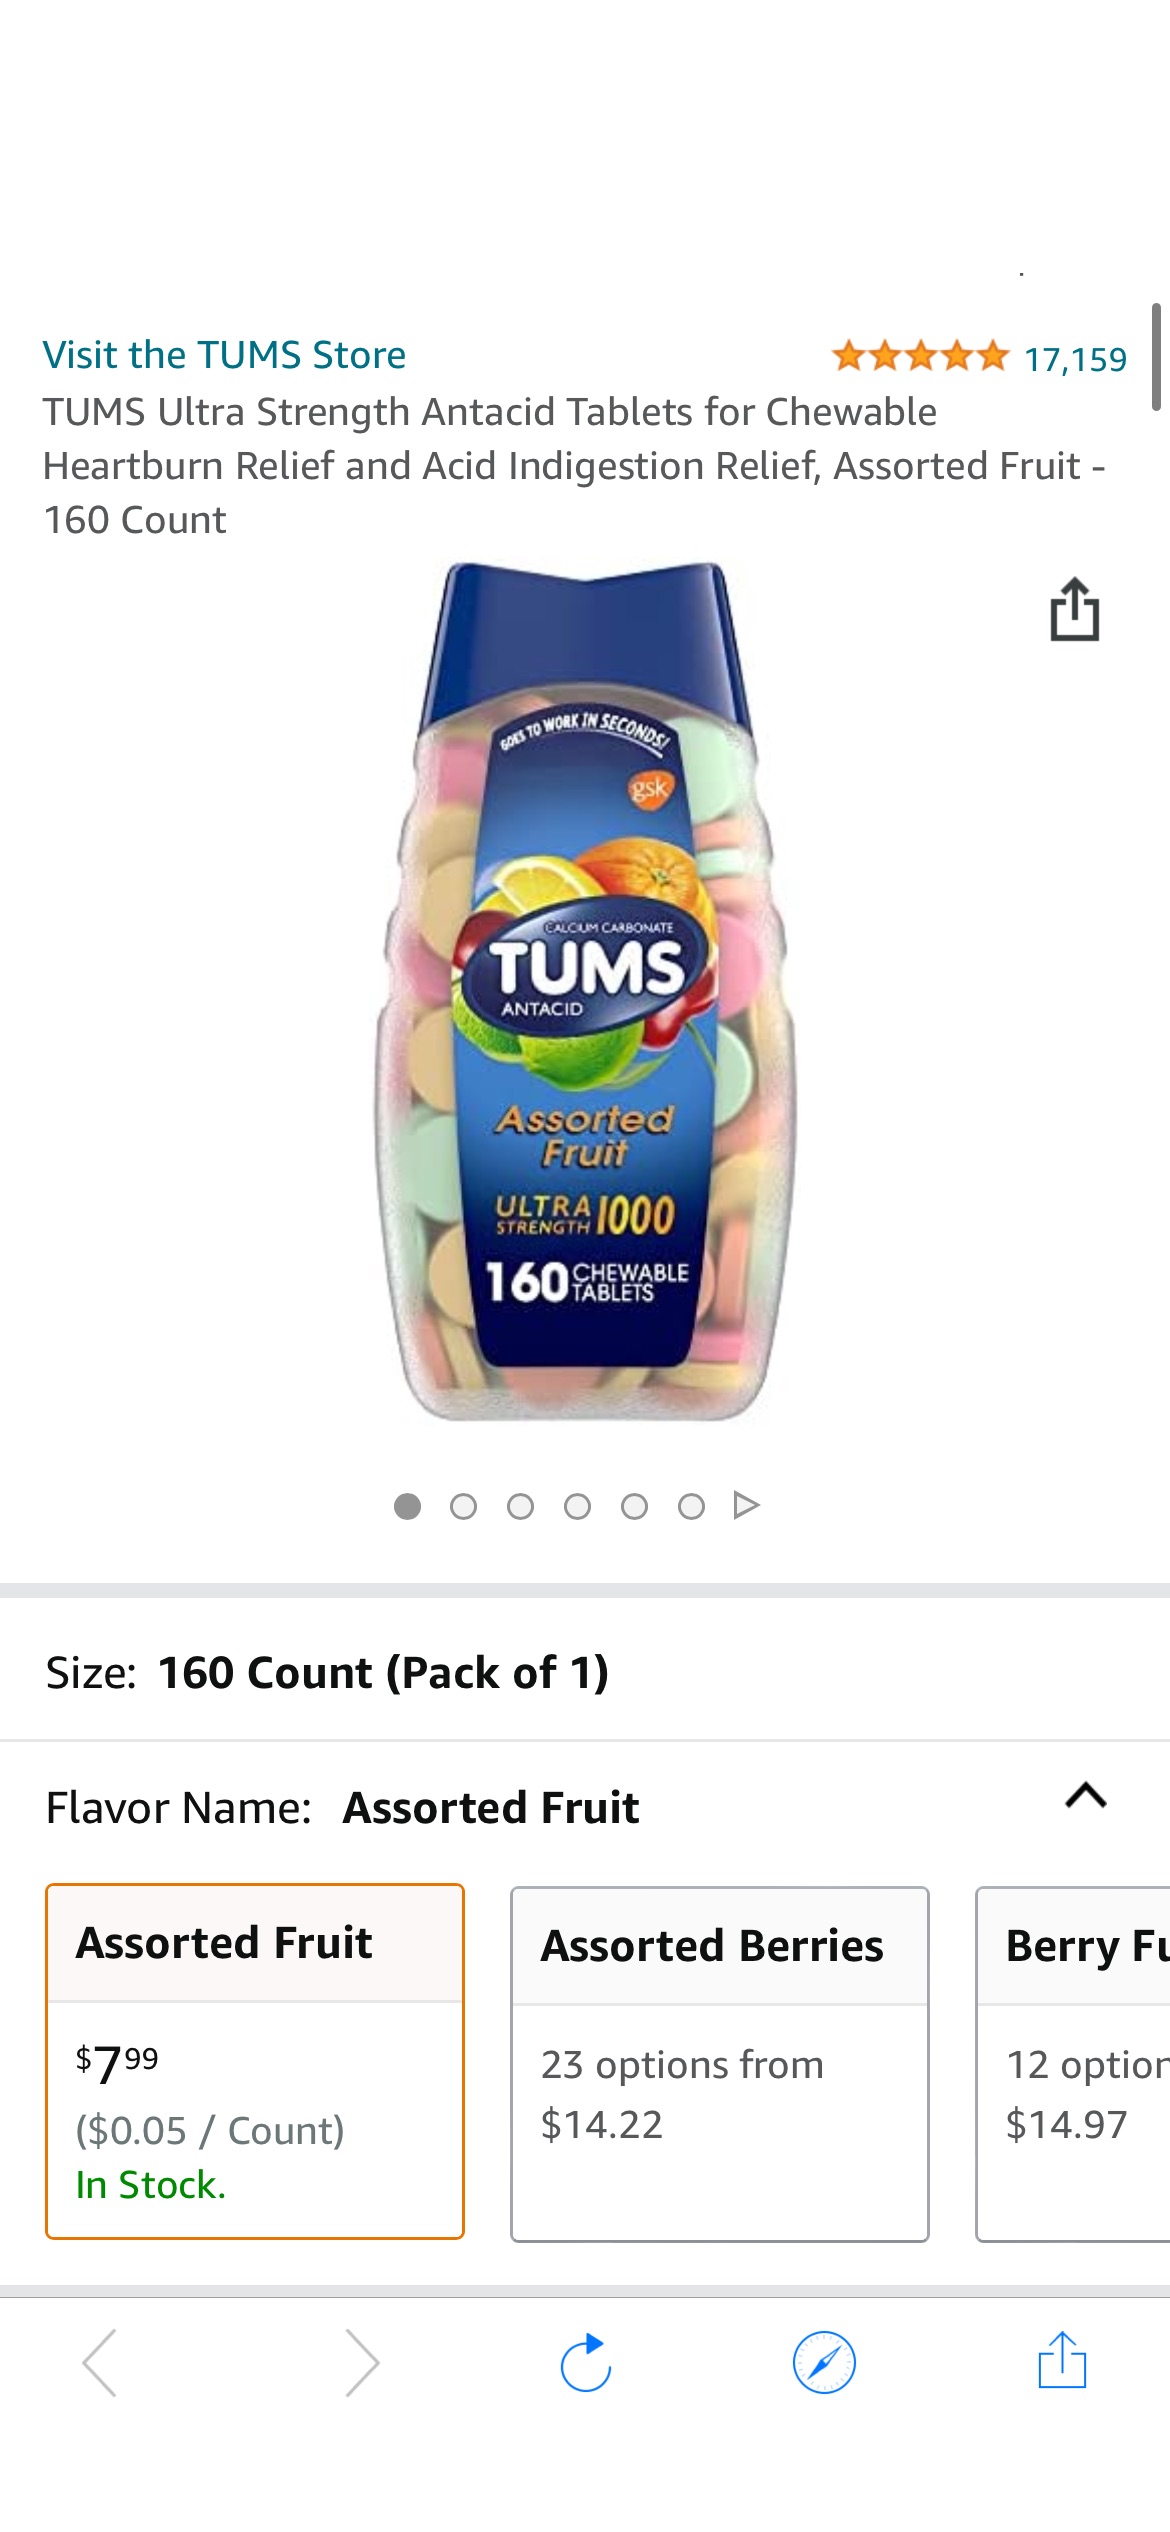 Amazon.com: TUMS Ultra Strength Antacid Tablets for Chewable Heartburn Relief and Acid Indigestion Relief, Assorted Fruit - 160 Count : Health & Household 消化药25%off